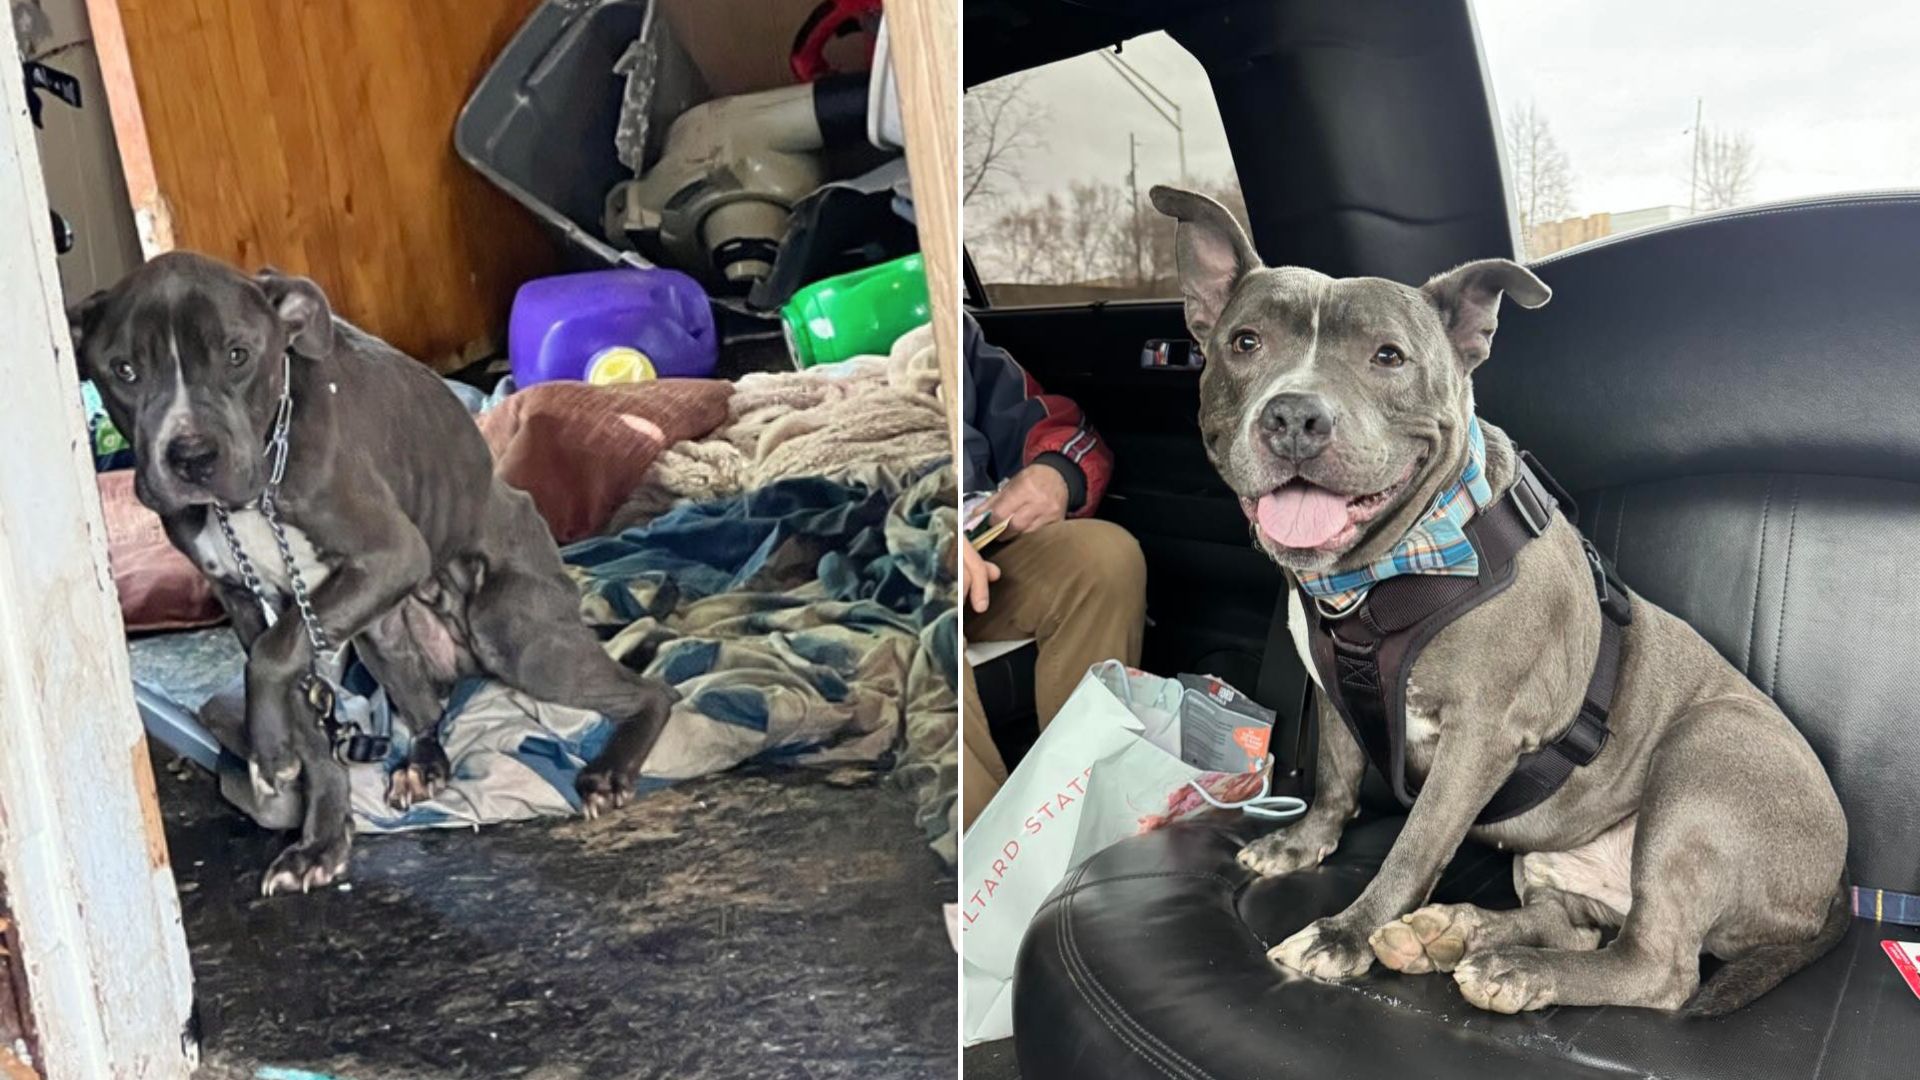 Rescue Dog Rolls To His New Home In A Luxury Limo After 2-Year Wait In His Kennel